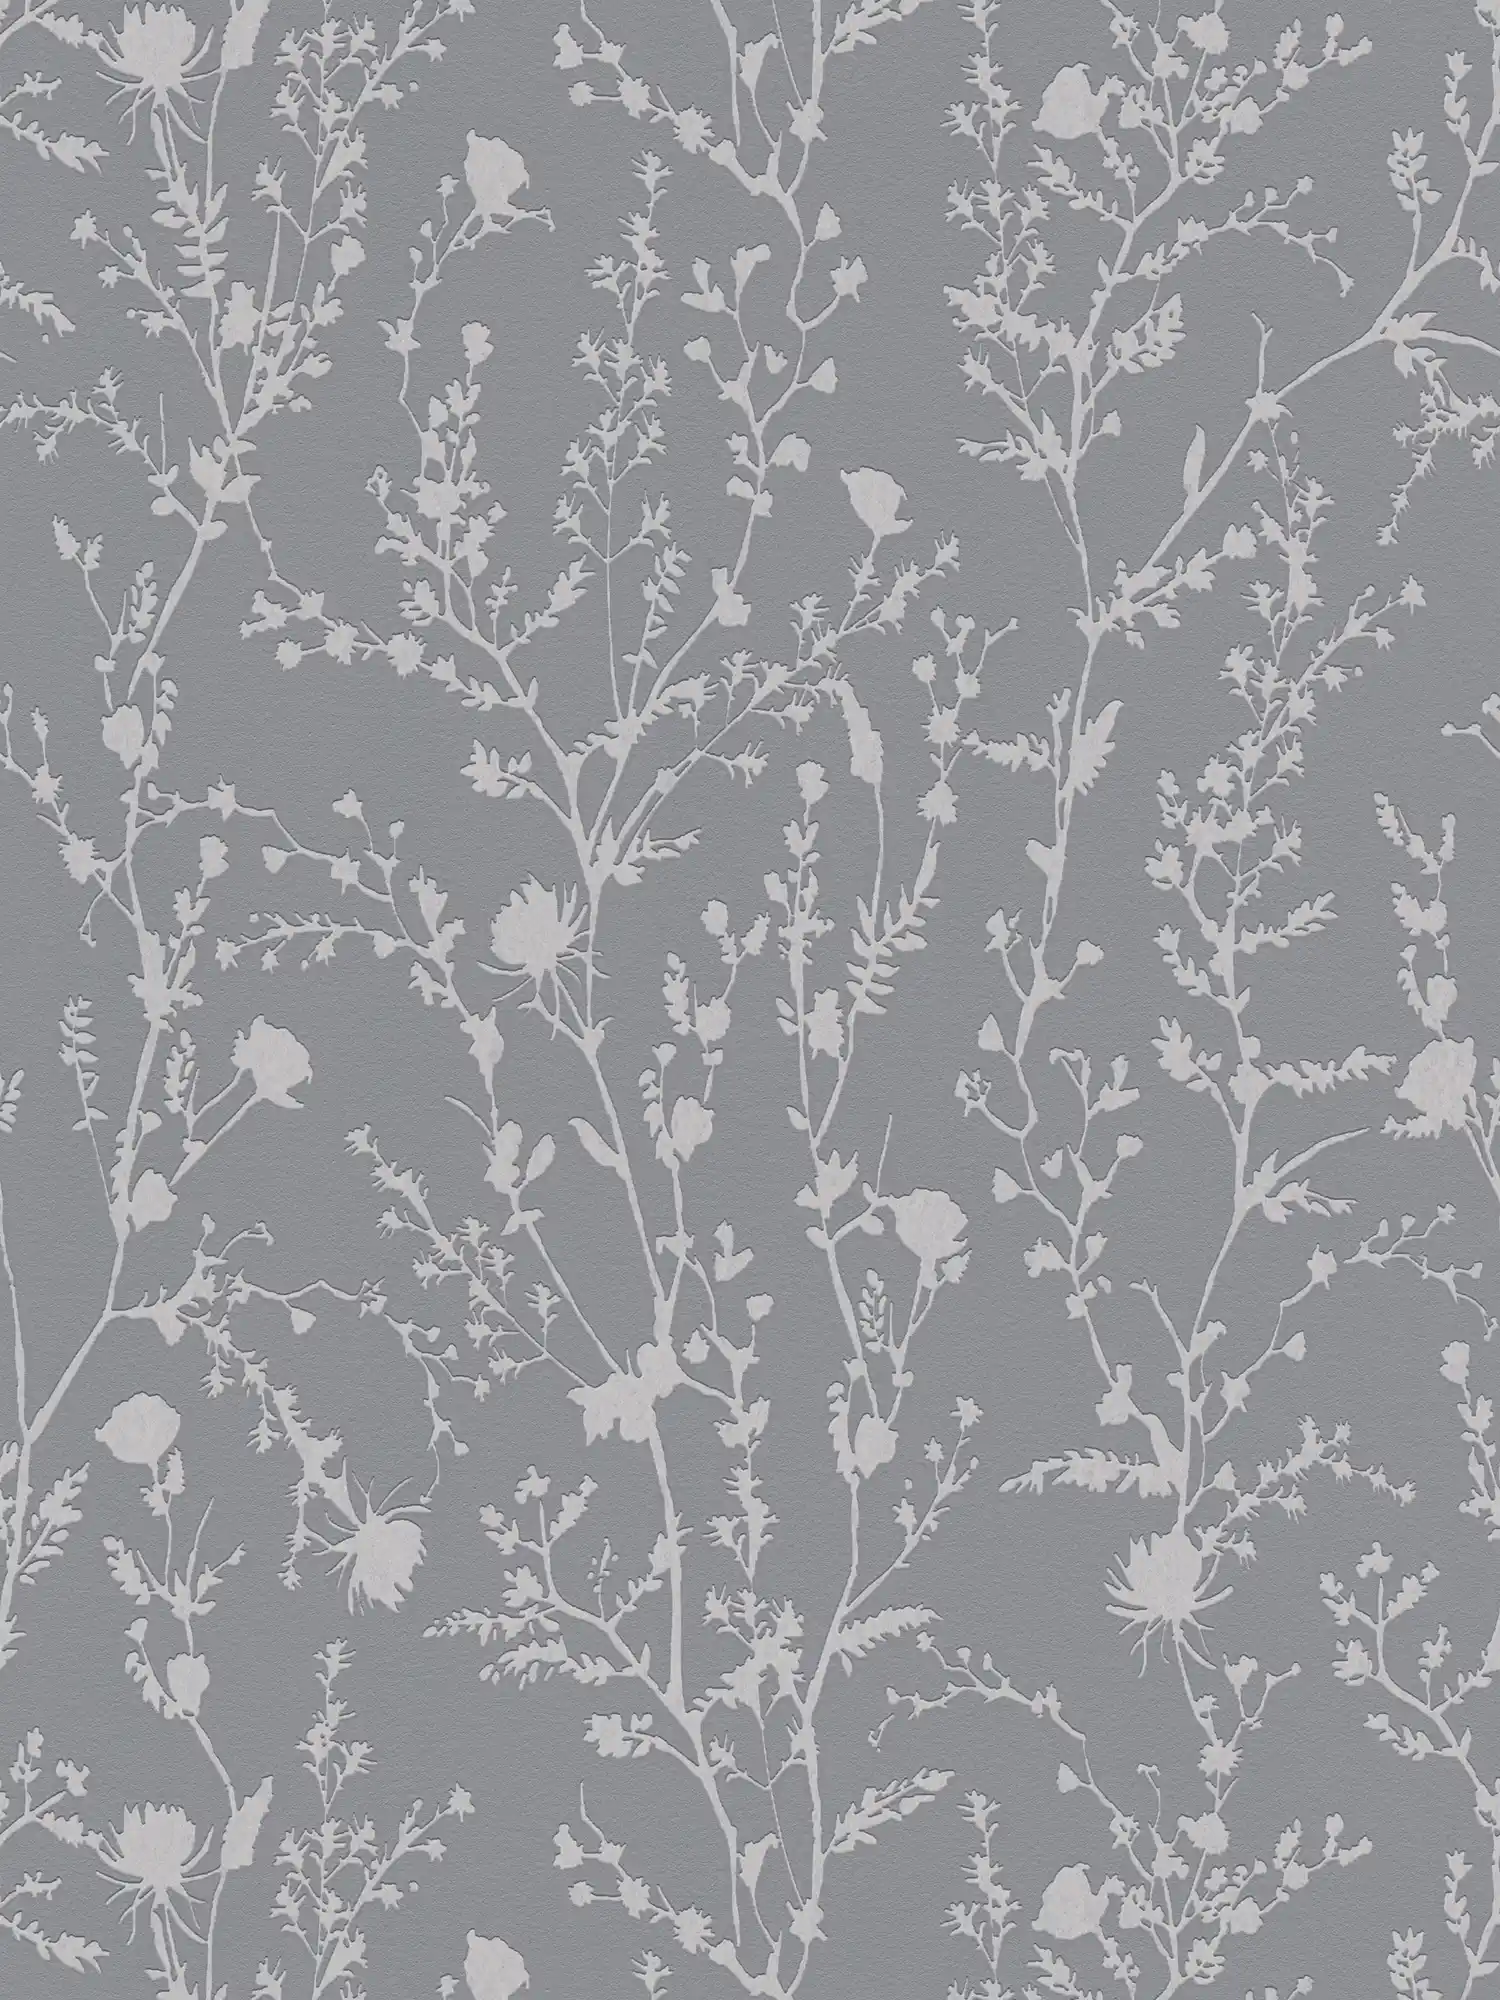 Floral wallpaper with soft grasses and blossoms pattern - grey, silver
